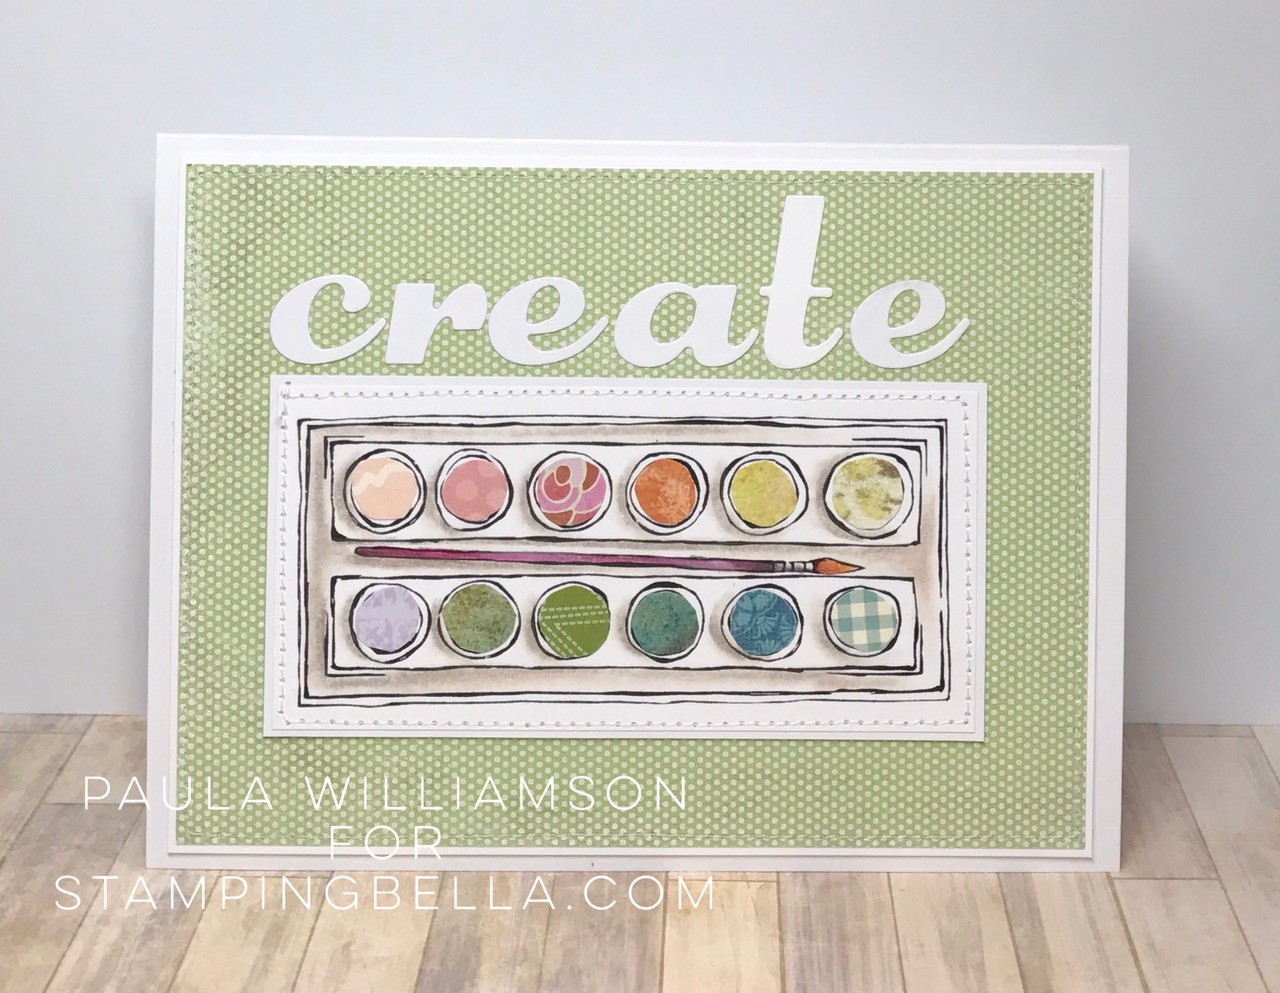 Danielle's SWATCH KIT- CIRCLE PALETTE with BRUSH- CARD BY PAULA WILLIAMSON